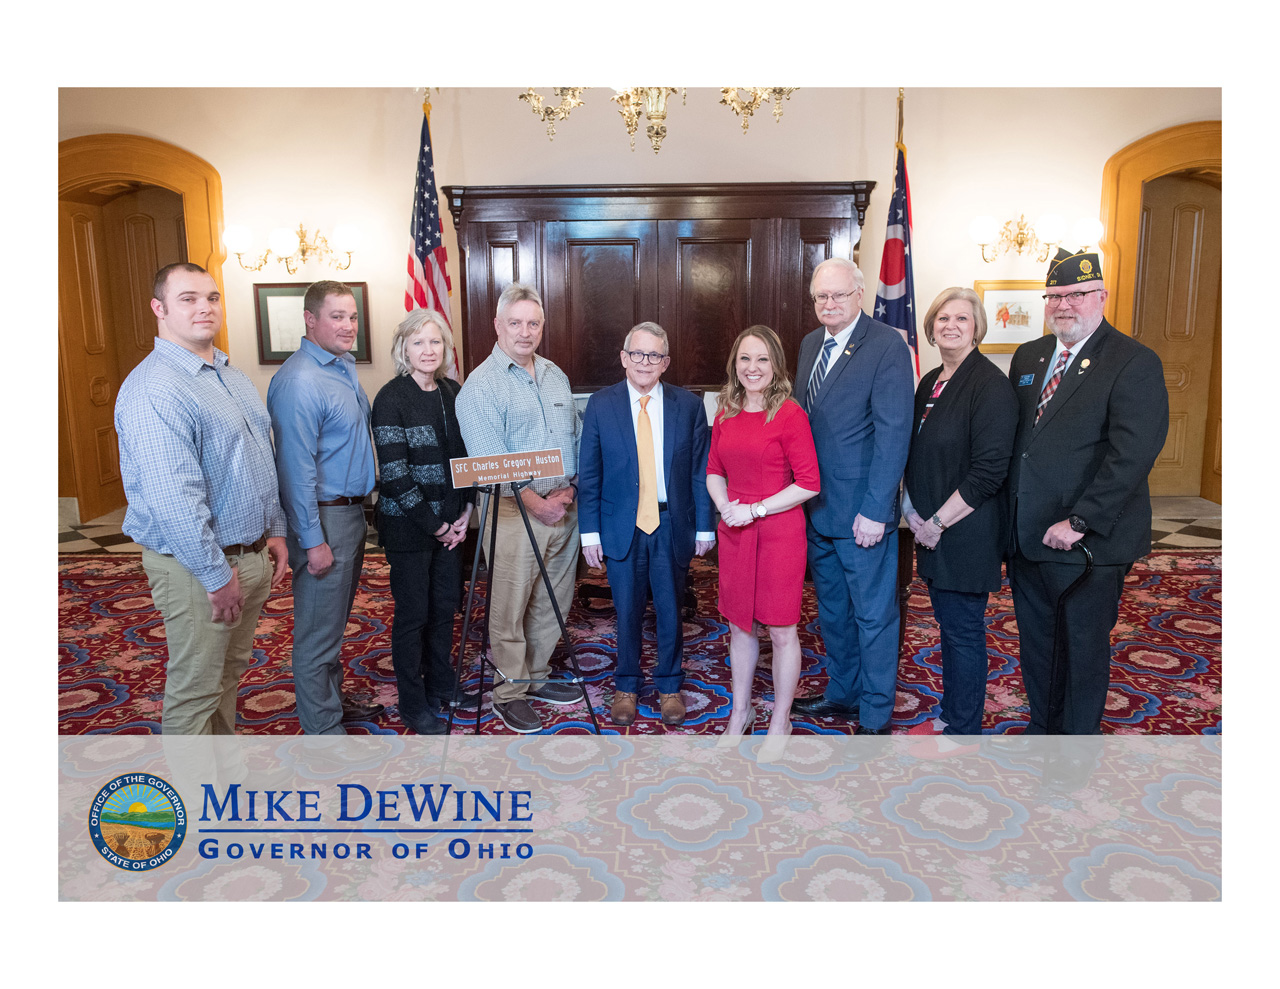 Governor DeWine signed House Bill 276 into Ohio law, honoring and remembering distinguished veterans and community leaders with the designation of multiple memorial highways and bridges across the state.